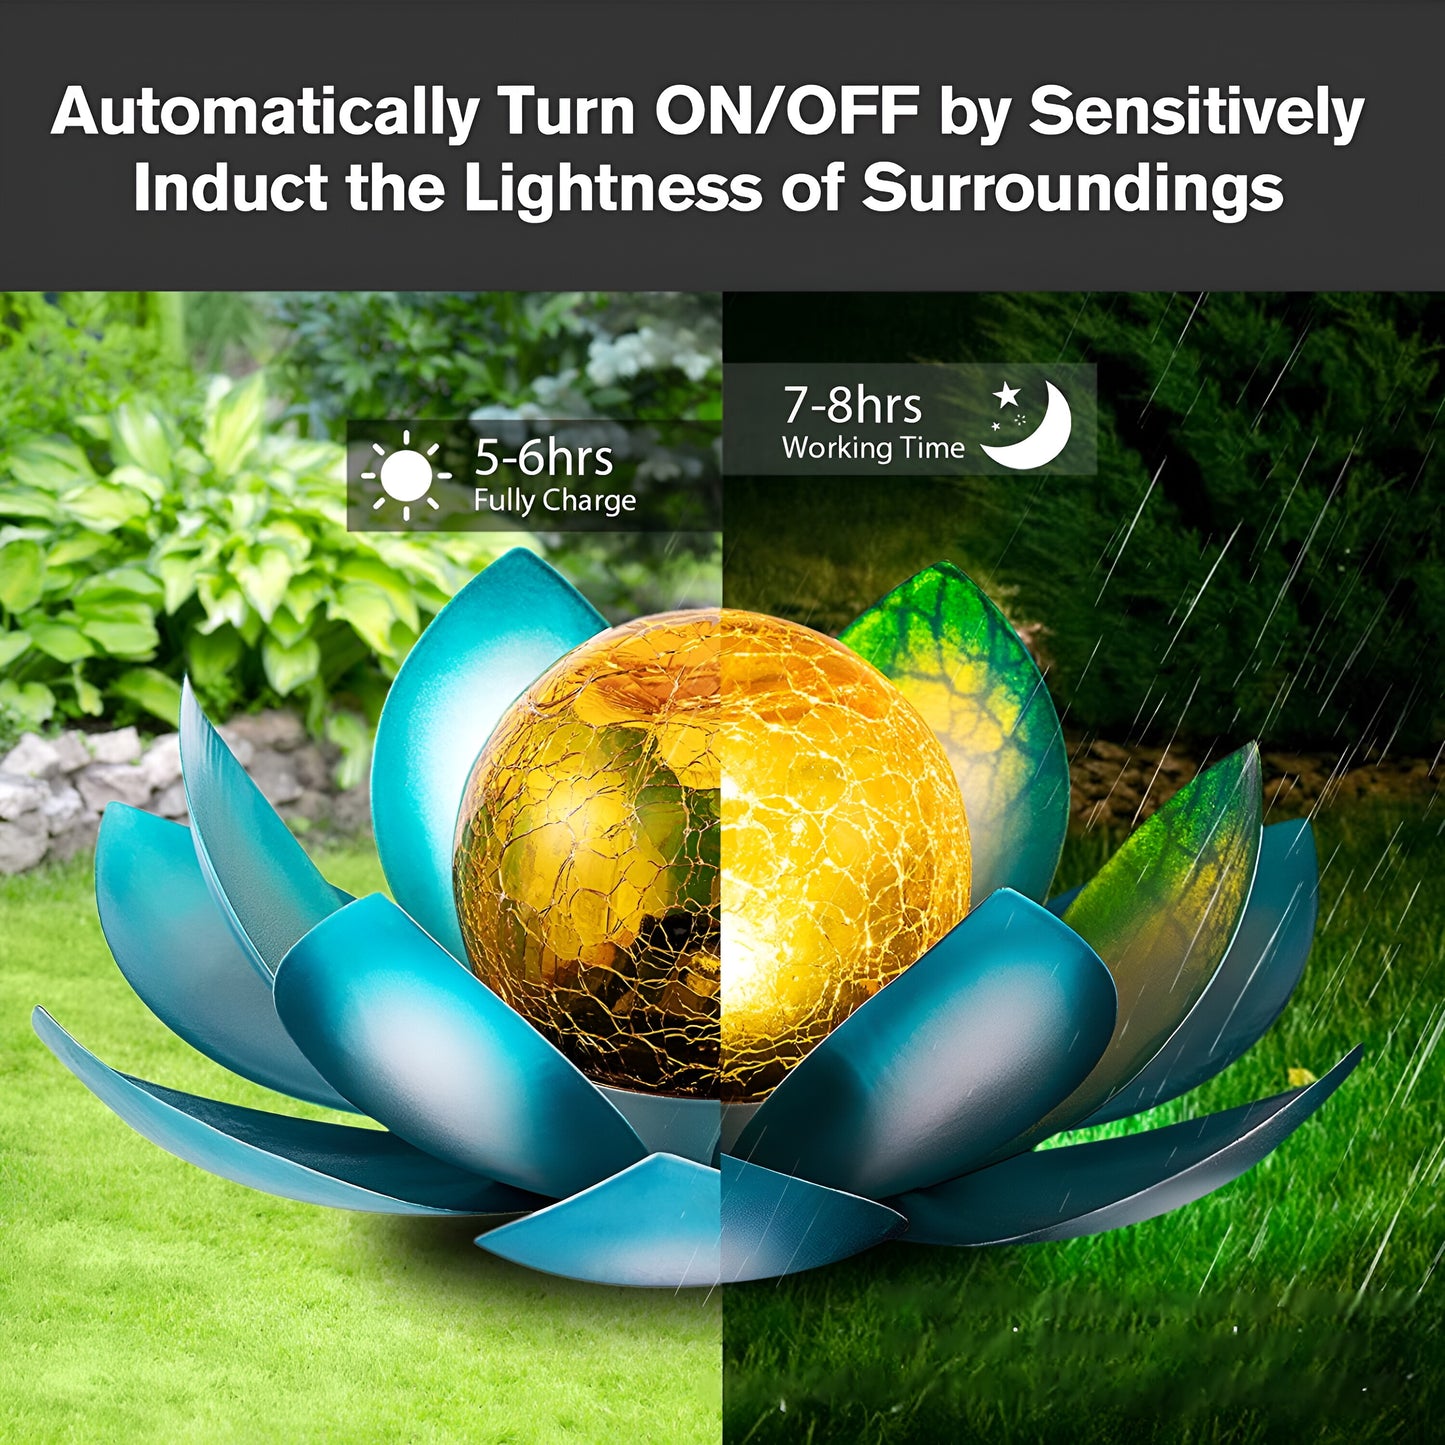 Solar Outdoor Simulation Lotus Lamp, 11.02 x 11.02 x 4.72 Inches, Lawn Decor Landscape Light, Suitable for Garden, Balcony, Yard Decoration, Waterproof, Energy-saving and Bright